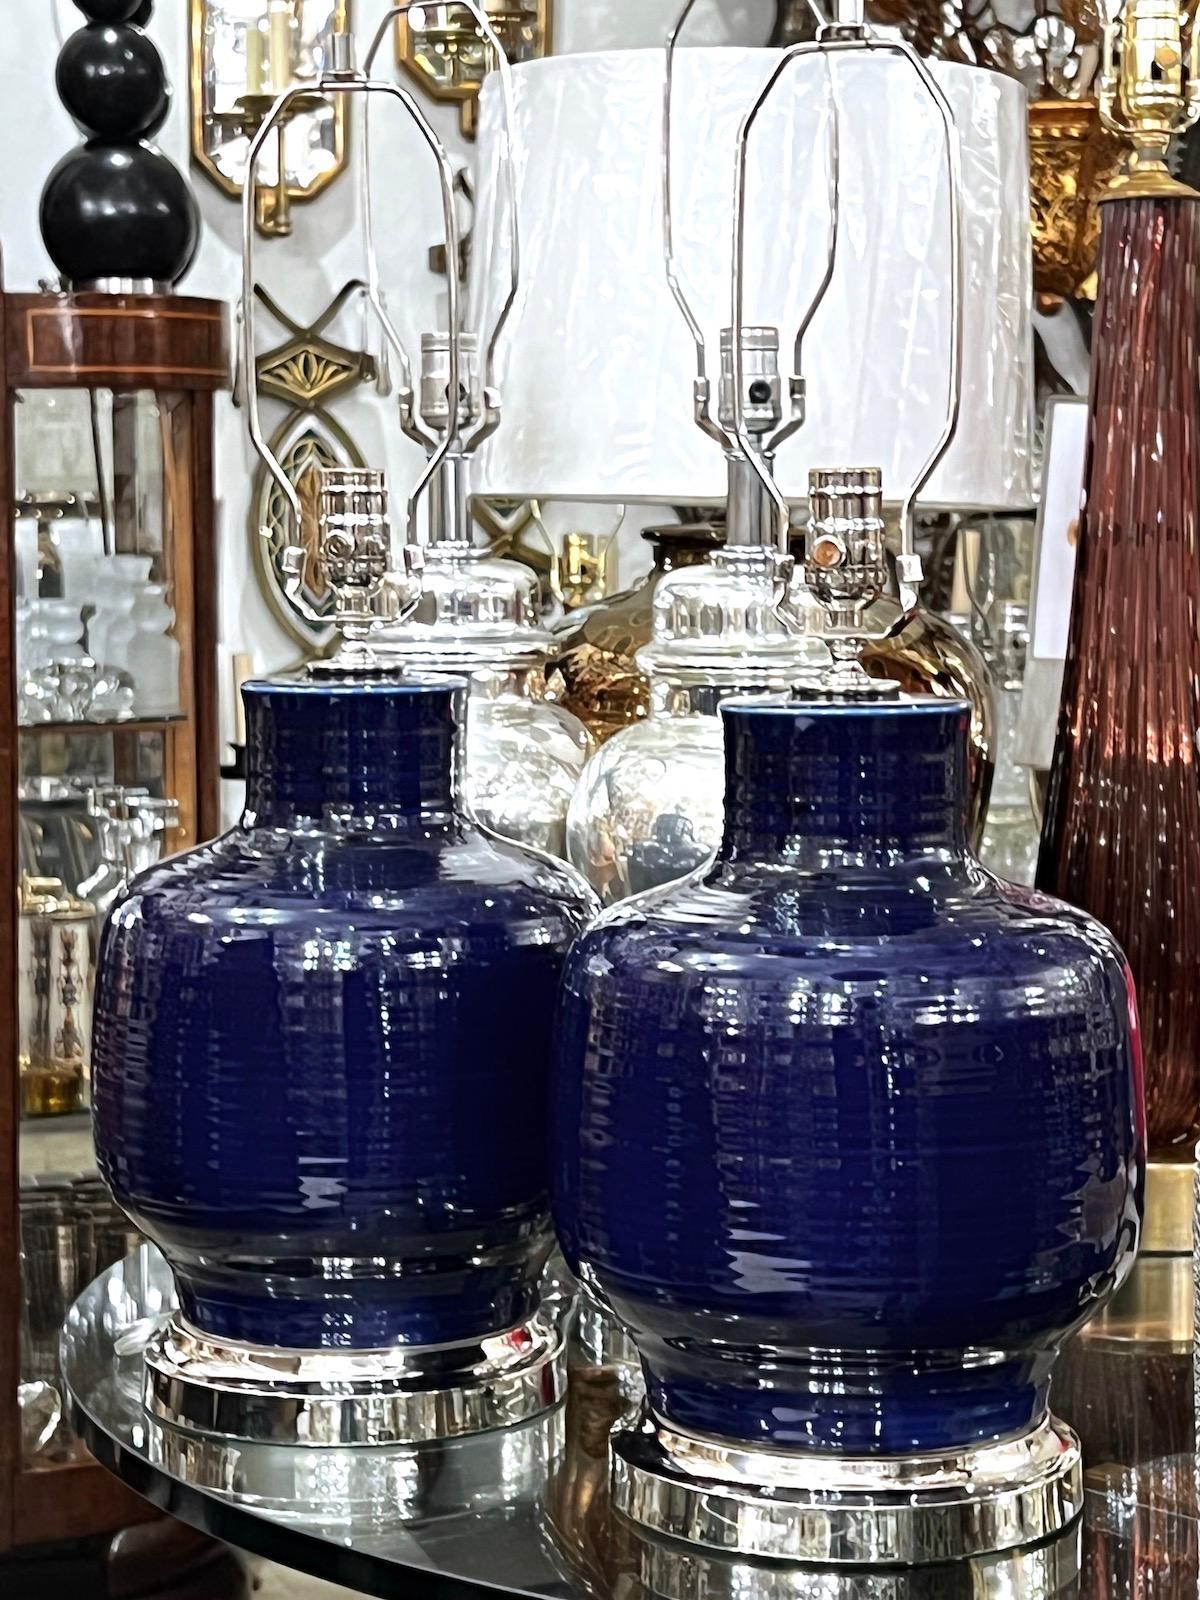 Pair of circa 1960's Italian cobalt blue ceramic table lamps with silver bases.

Measurements:
Height of body: 15